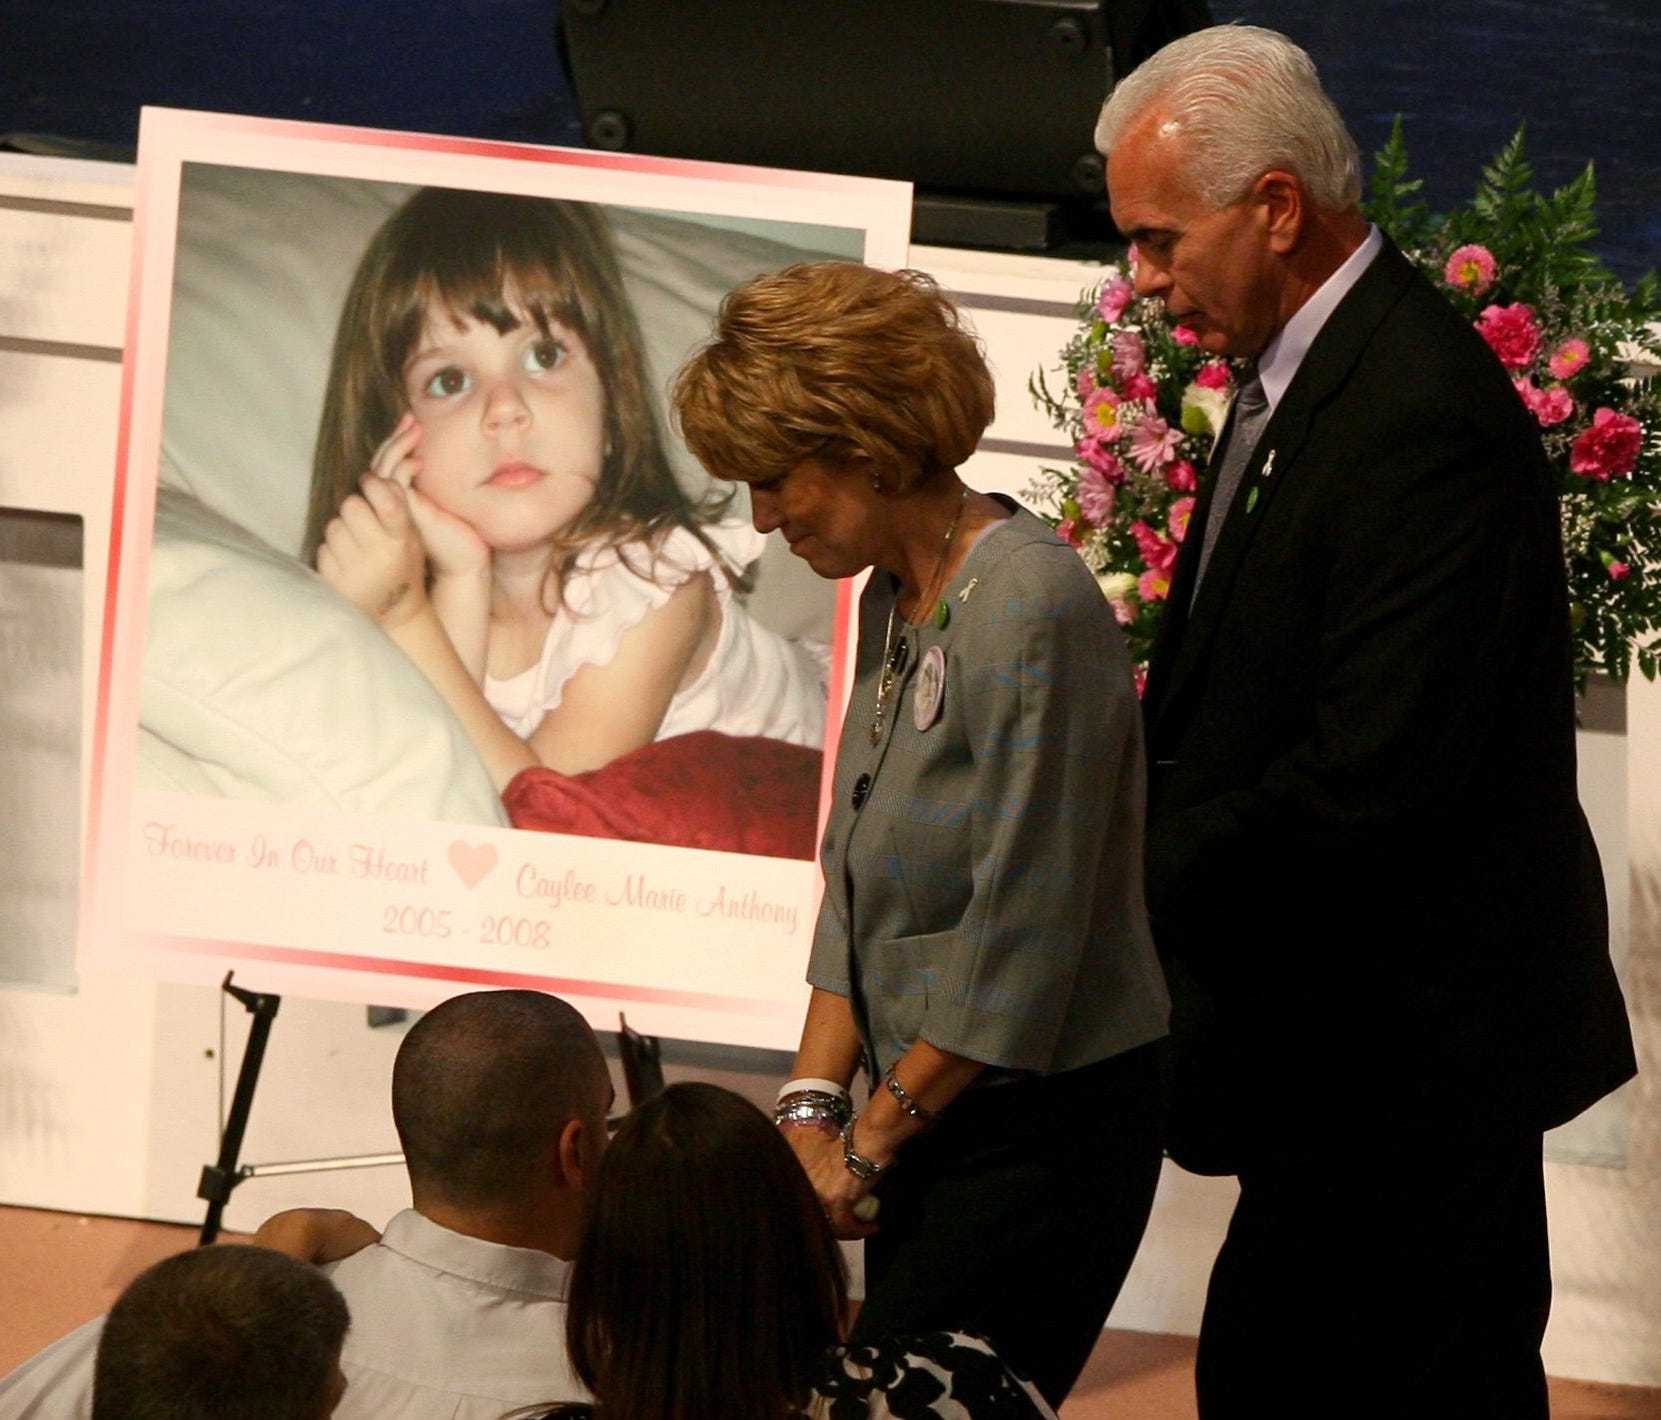 Cindy, left, and George Anthony at the memorial for their granddaughter Caylee Anthony at First Baptist Orlando in Orlando, Fla. on Feb. 10, 2009.